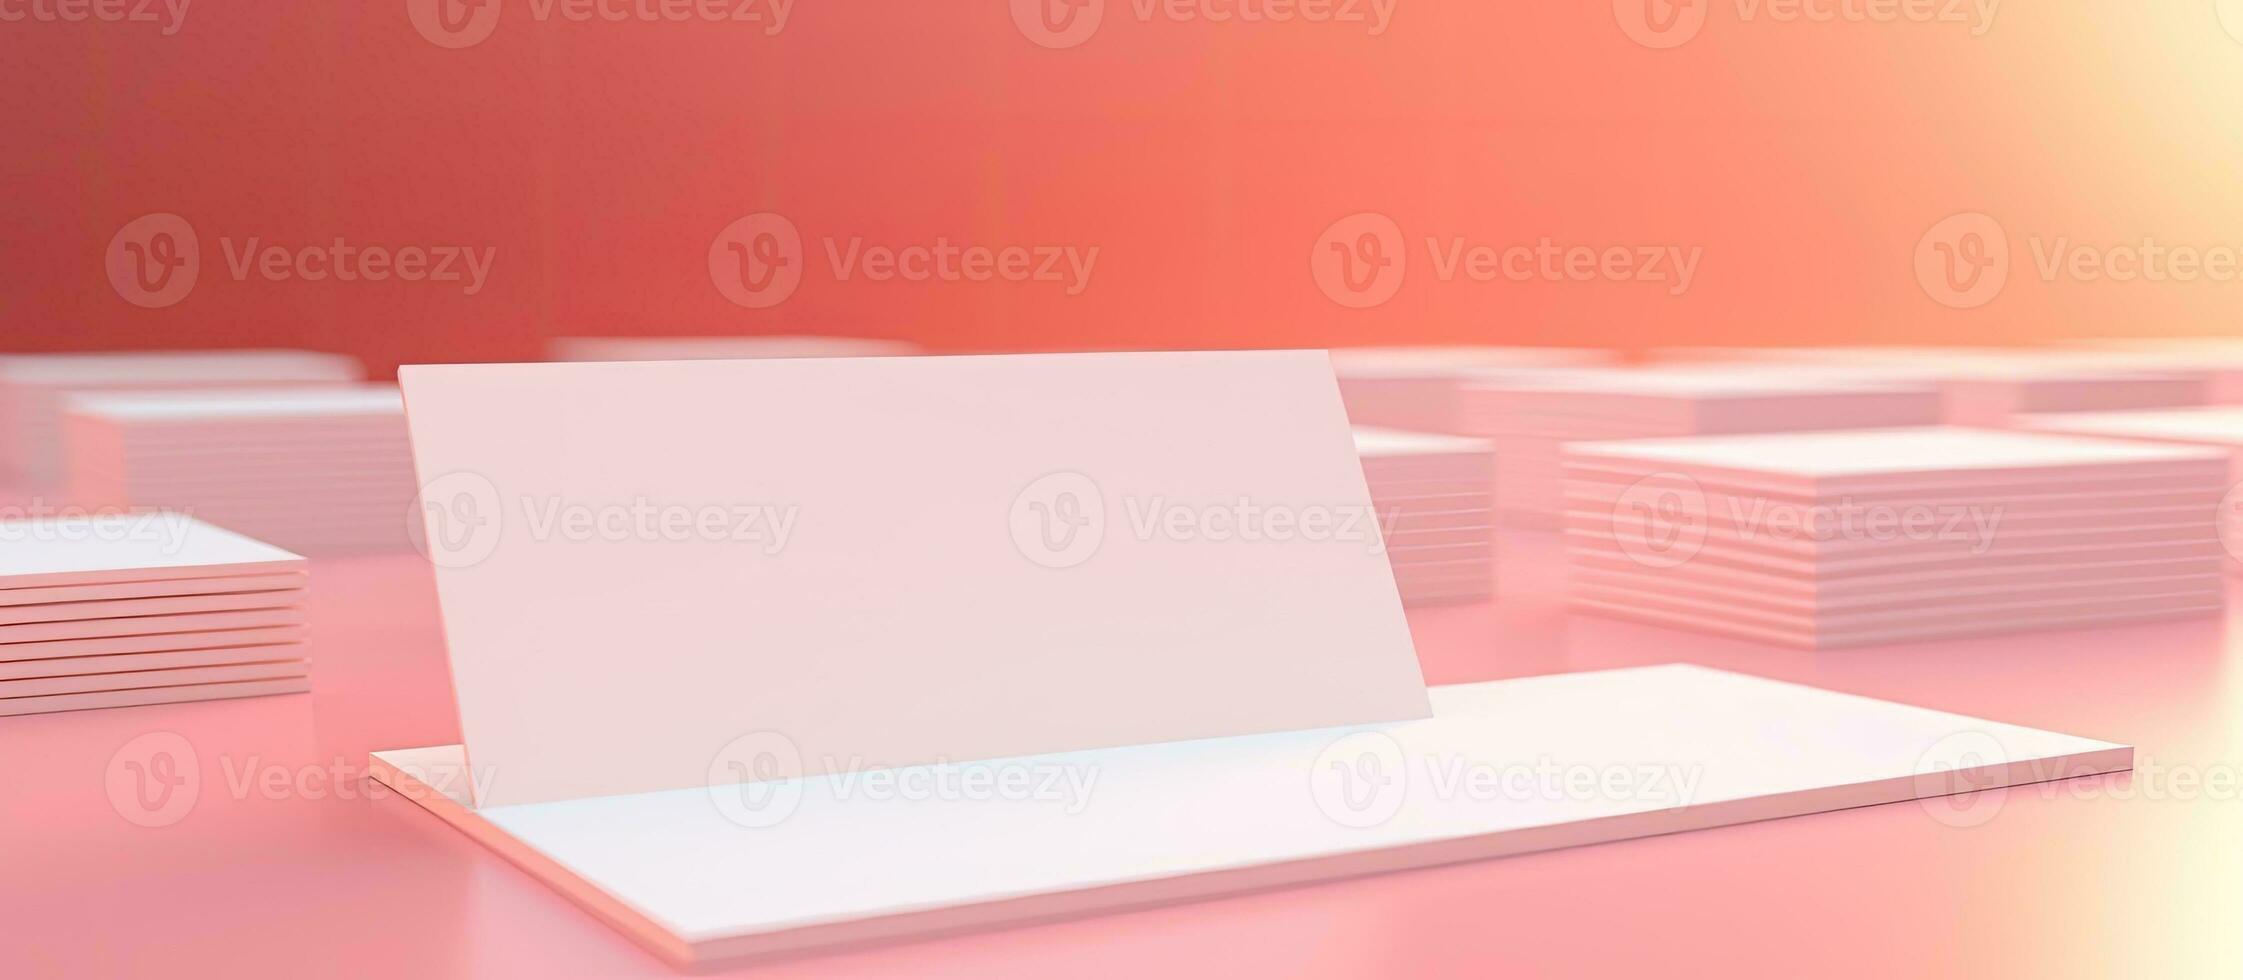 White business cards with an area for writing on a pink background. Concept of business, business photo